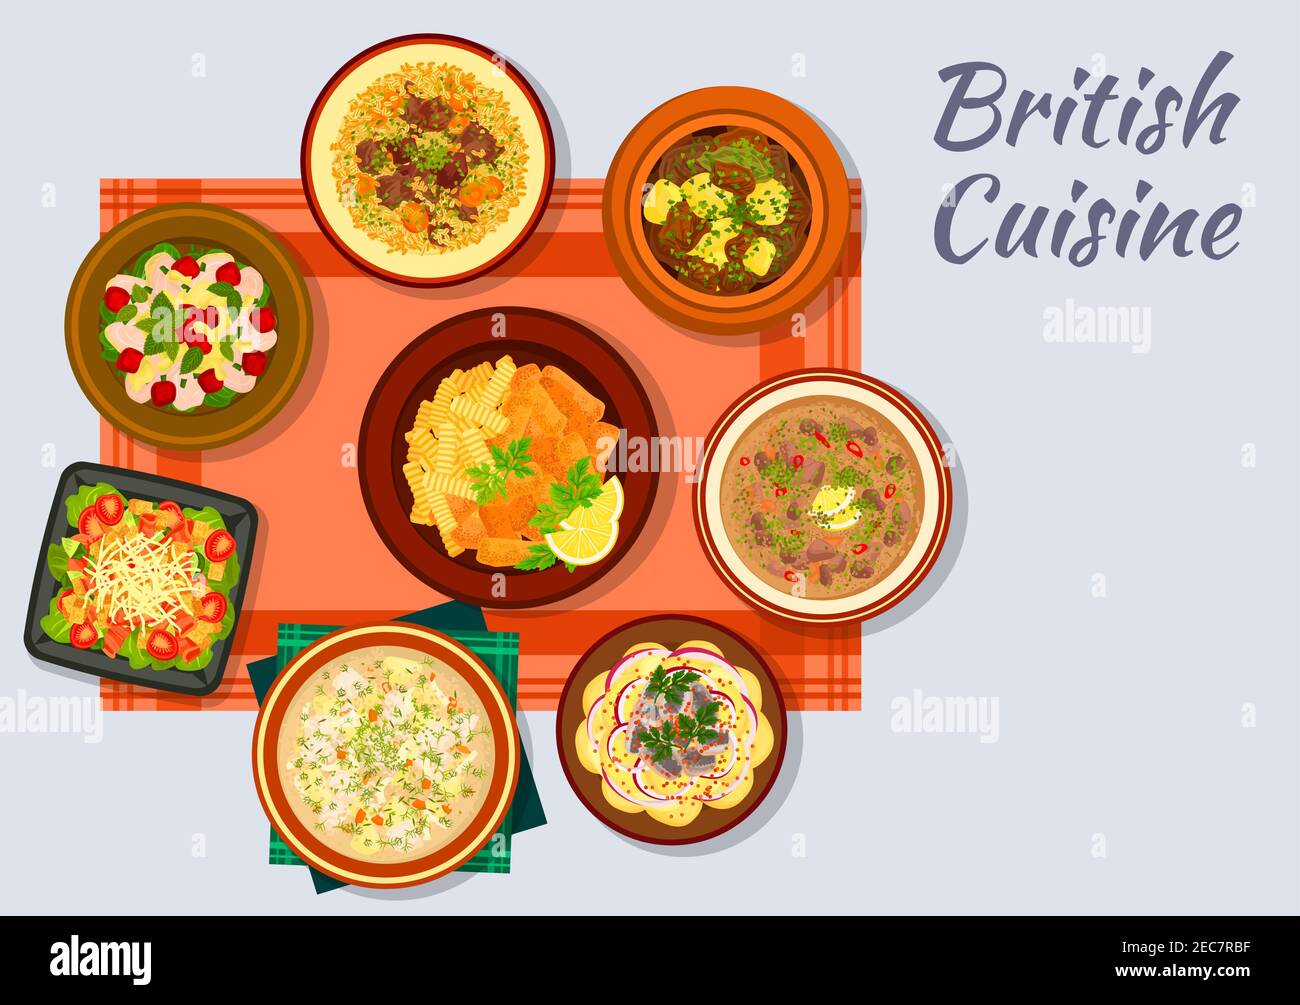 British cuisine sign with fish and fries, bacon, lettuce and tomato salad, irish vegetable stew, lamb with bread sauce, chicken cherry salad, irish fi Stock Vector